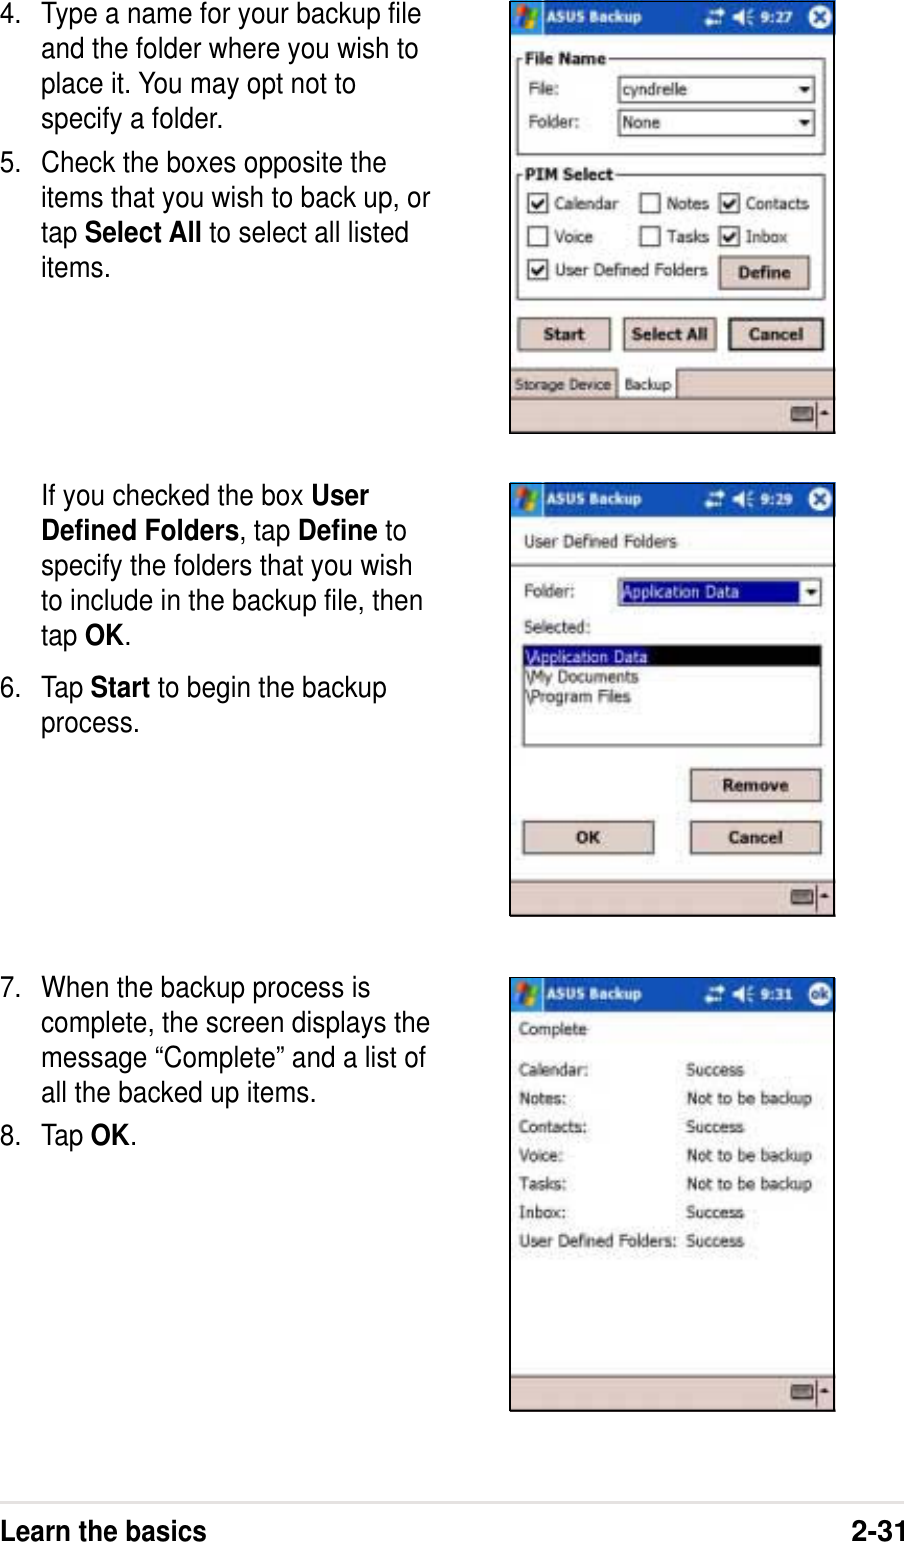 Learn the basics2-31If you checked the box UserDefined Folders, tap Define tospecify the folders that you wishto include in the backup file, thentap OK.6. Tap Start to begin the backupprocess.7. When the backup process iscomplete, the screen displays themessage “Complete” and a list ofall the backed up items.8. Tap OK.4. Type a name for your backup fileand the folder where you wish toplace it. You may opt not tospecify a folder.5. Check the boxes opposite theitems that you wish to back up, ortap Select All to select all listeditems.